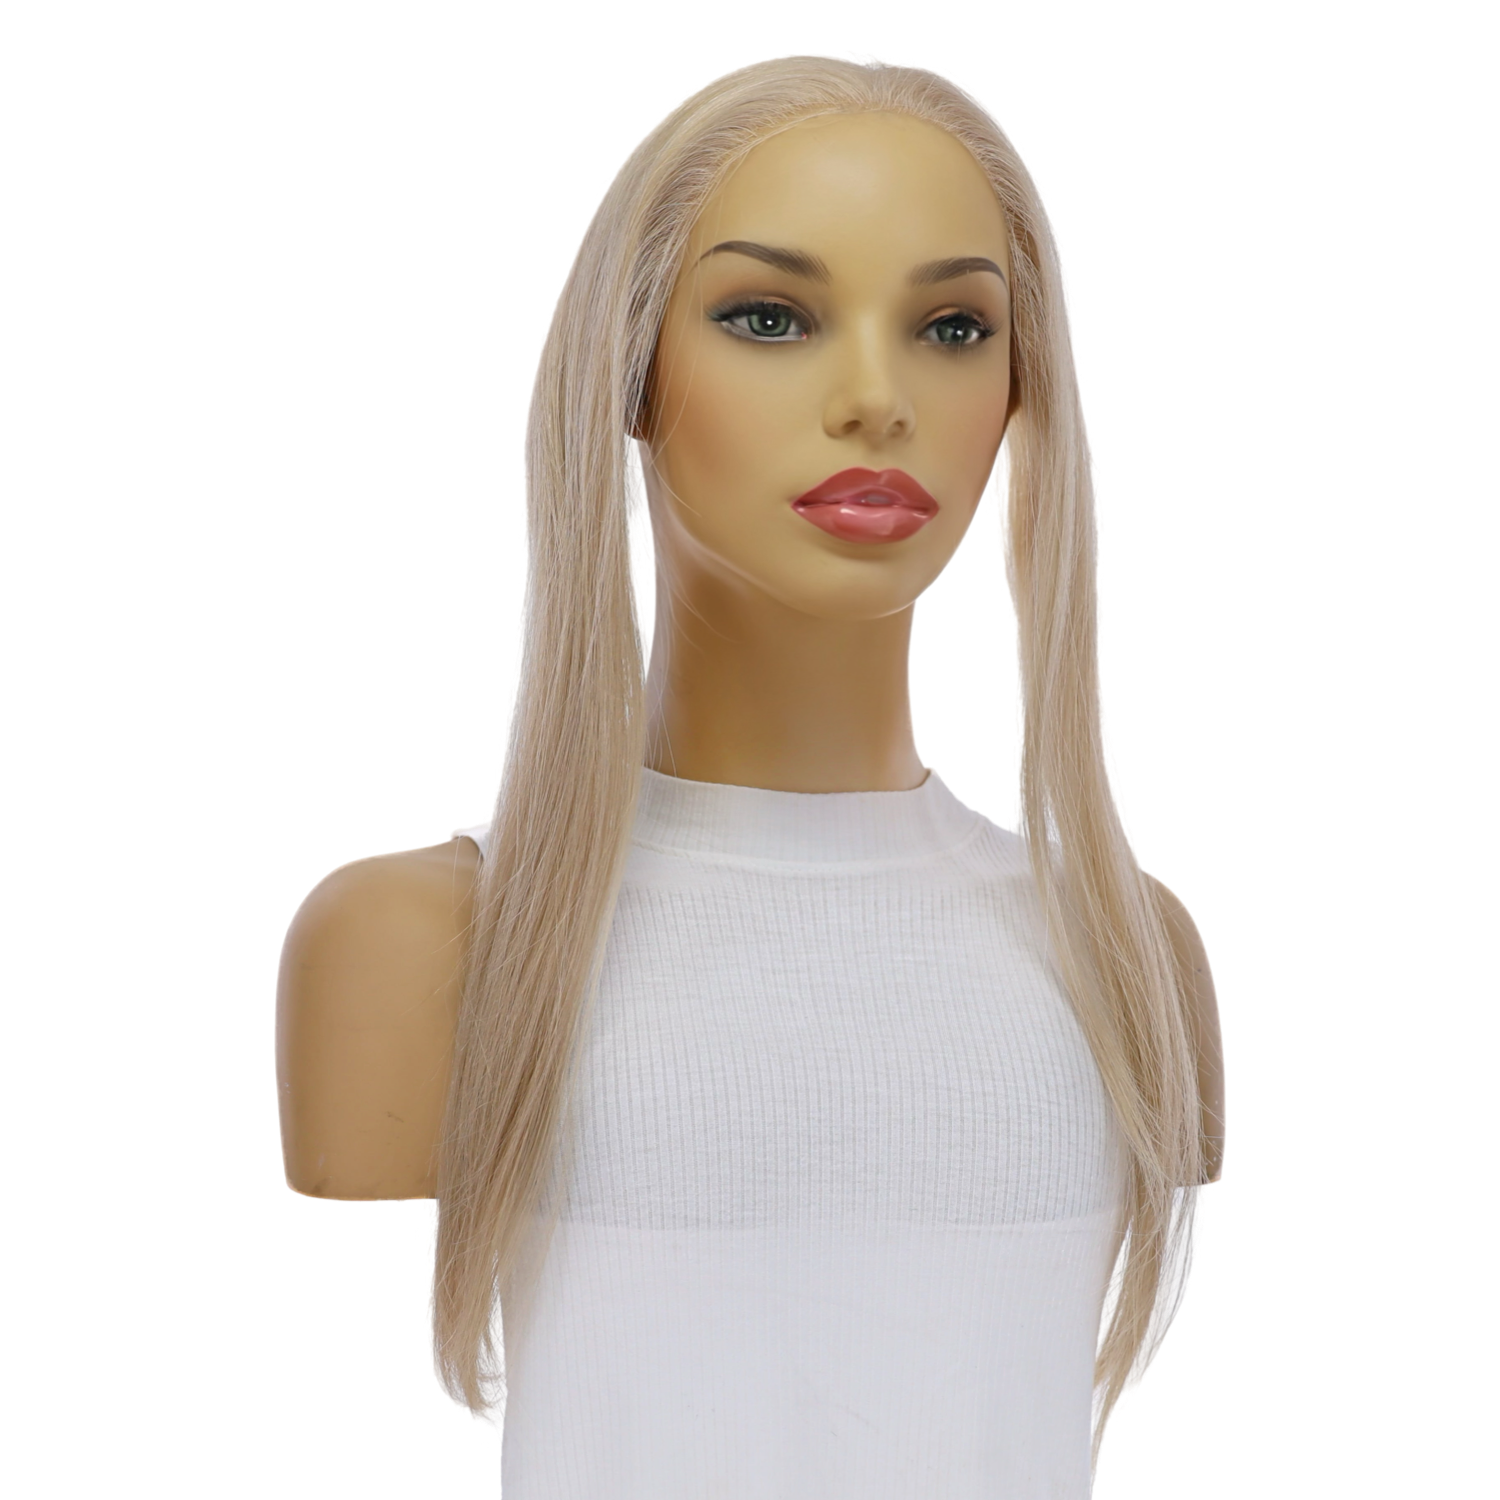 16" Hairline Topper #Platinum Blonde w/ No Rooting